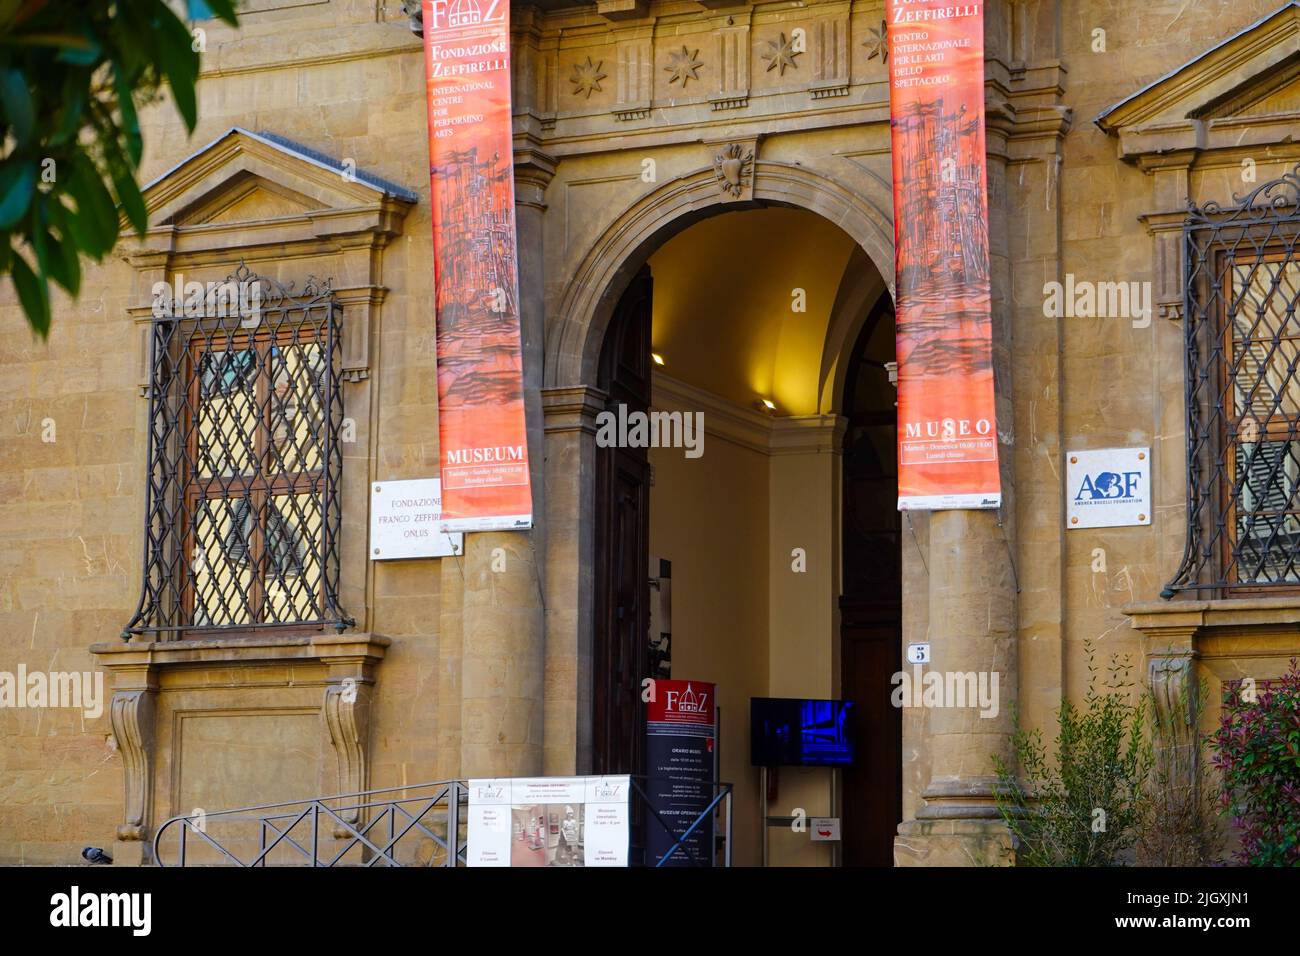 Entrance to the Franco Zeffirelli Foundation Museum complex, Firenze, Italy. Stock Photo